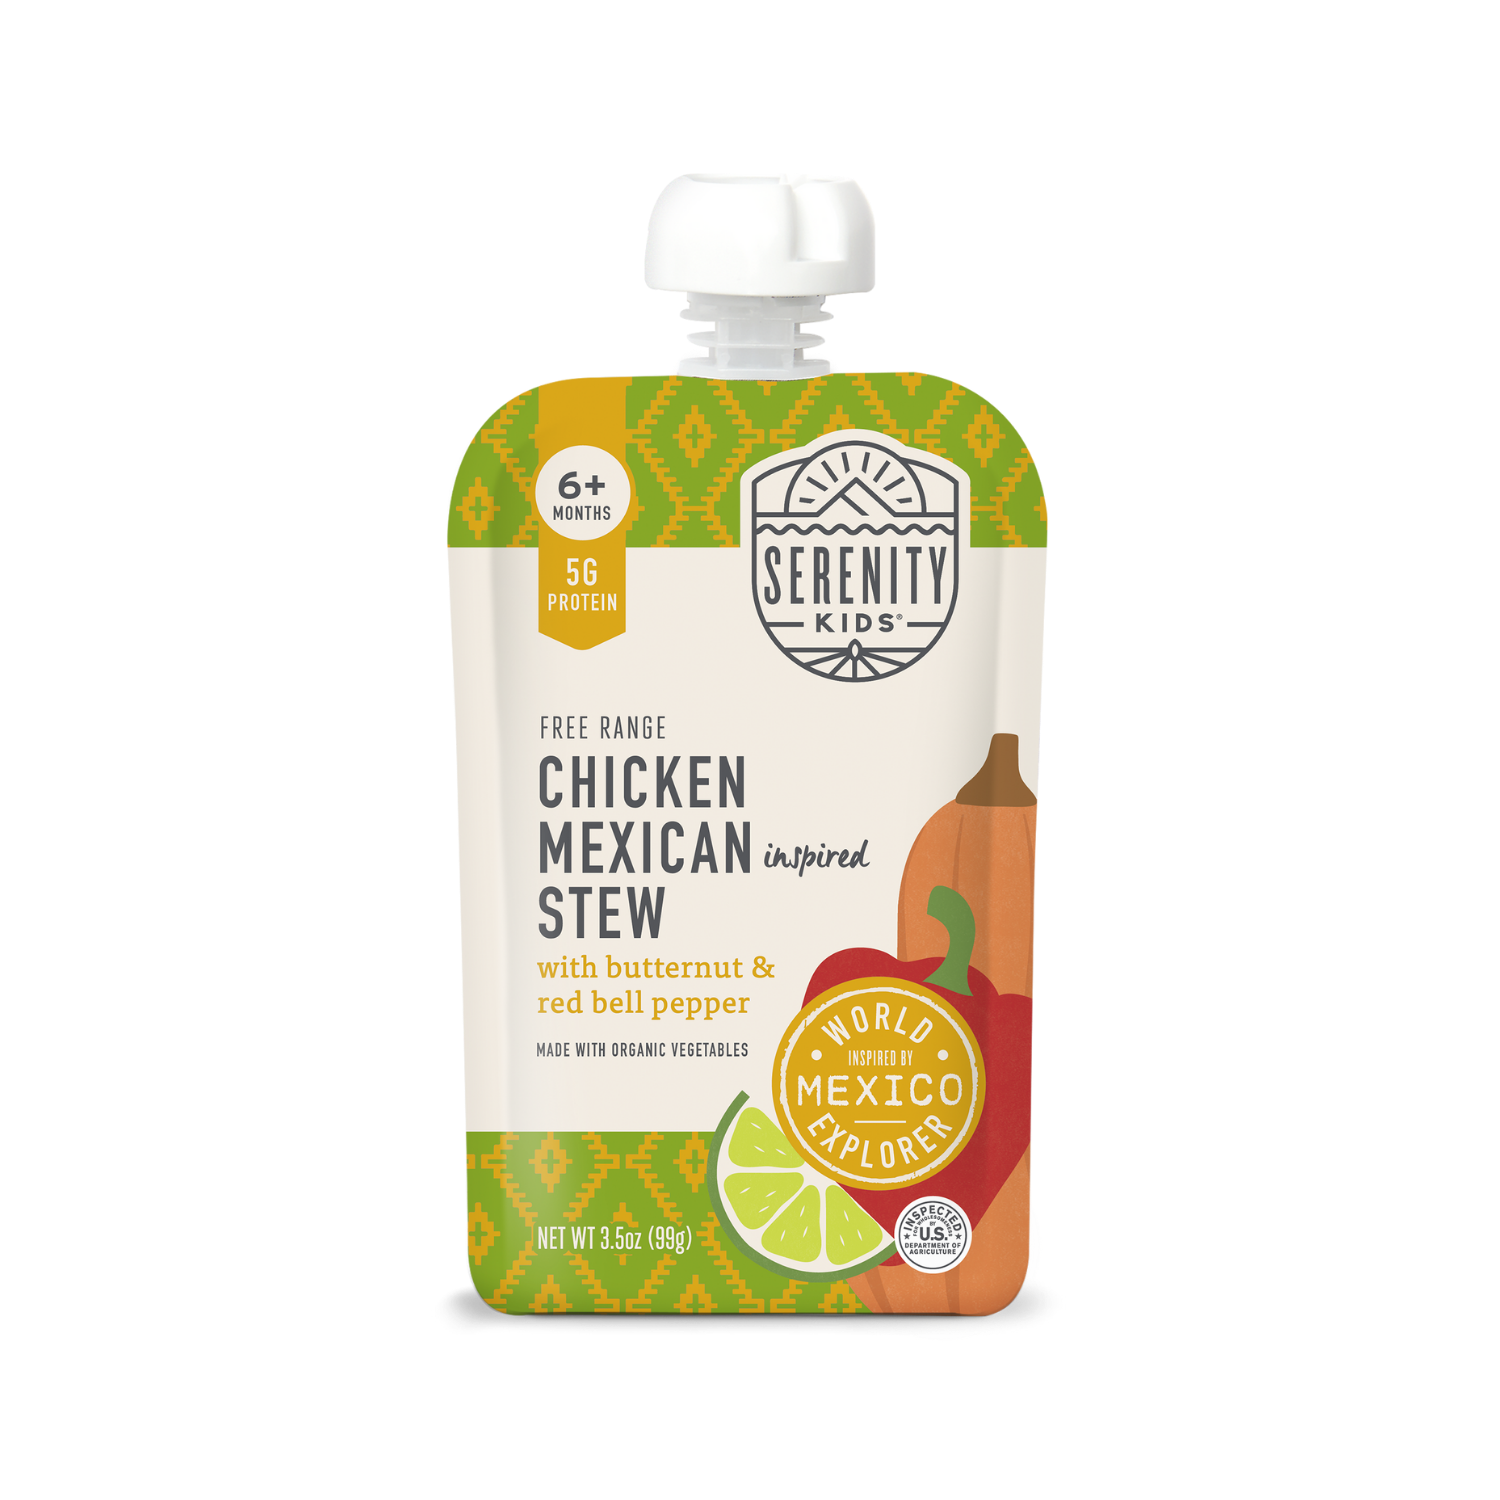 Chicken Mexican Stew Baby Food